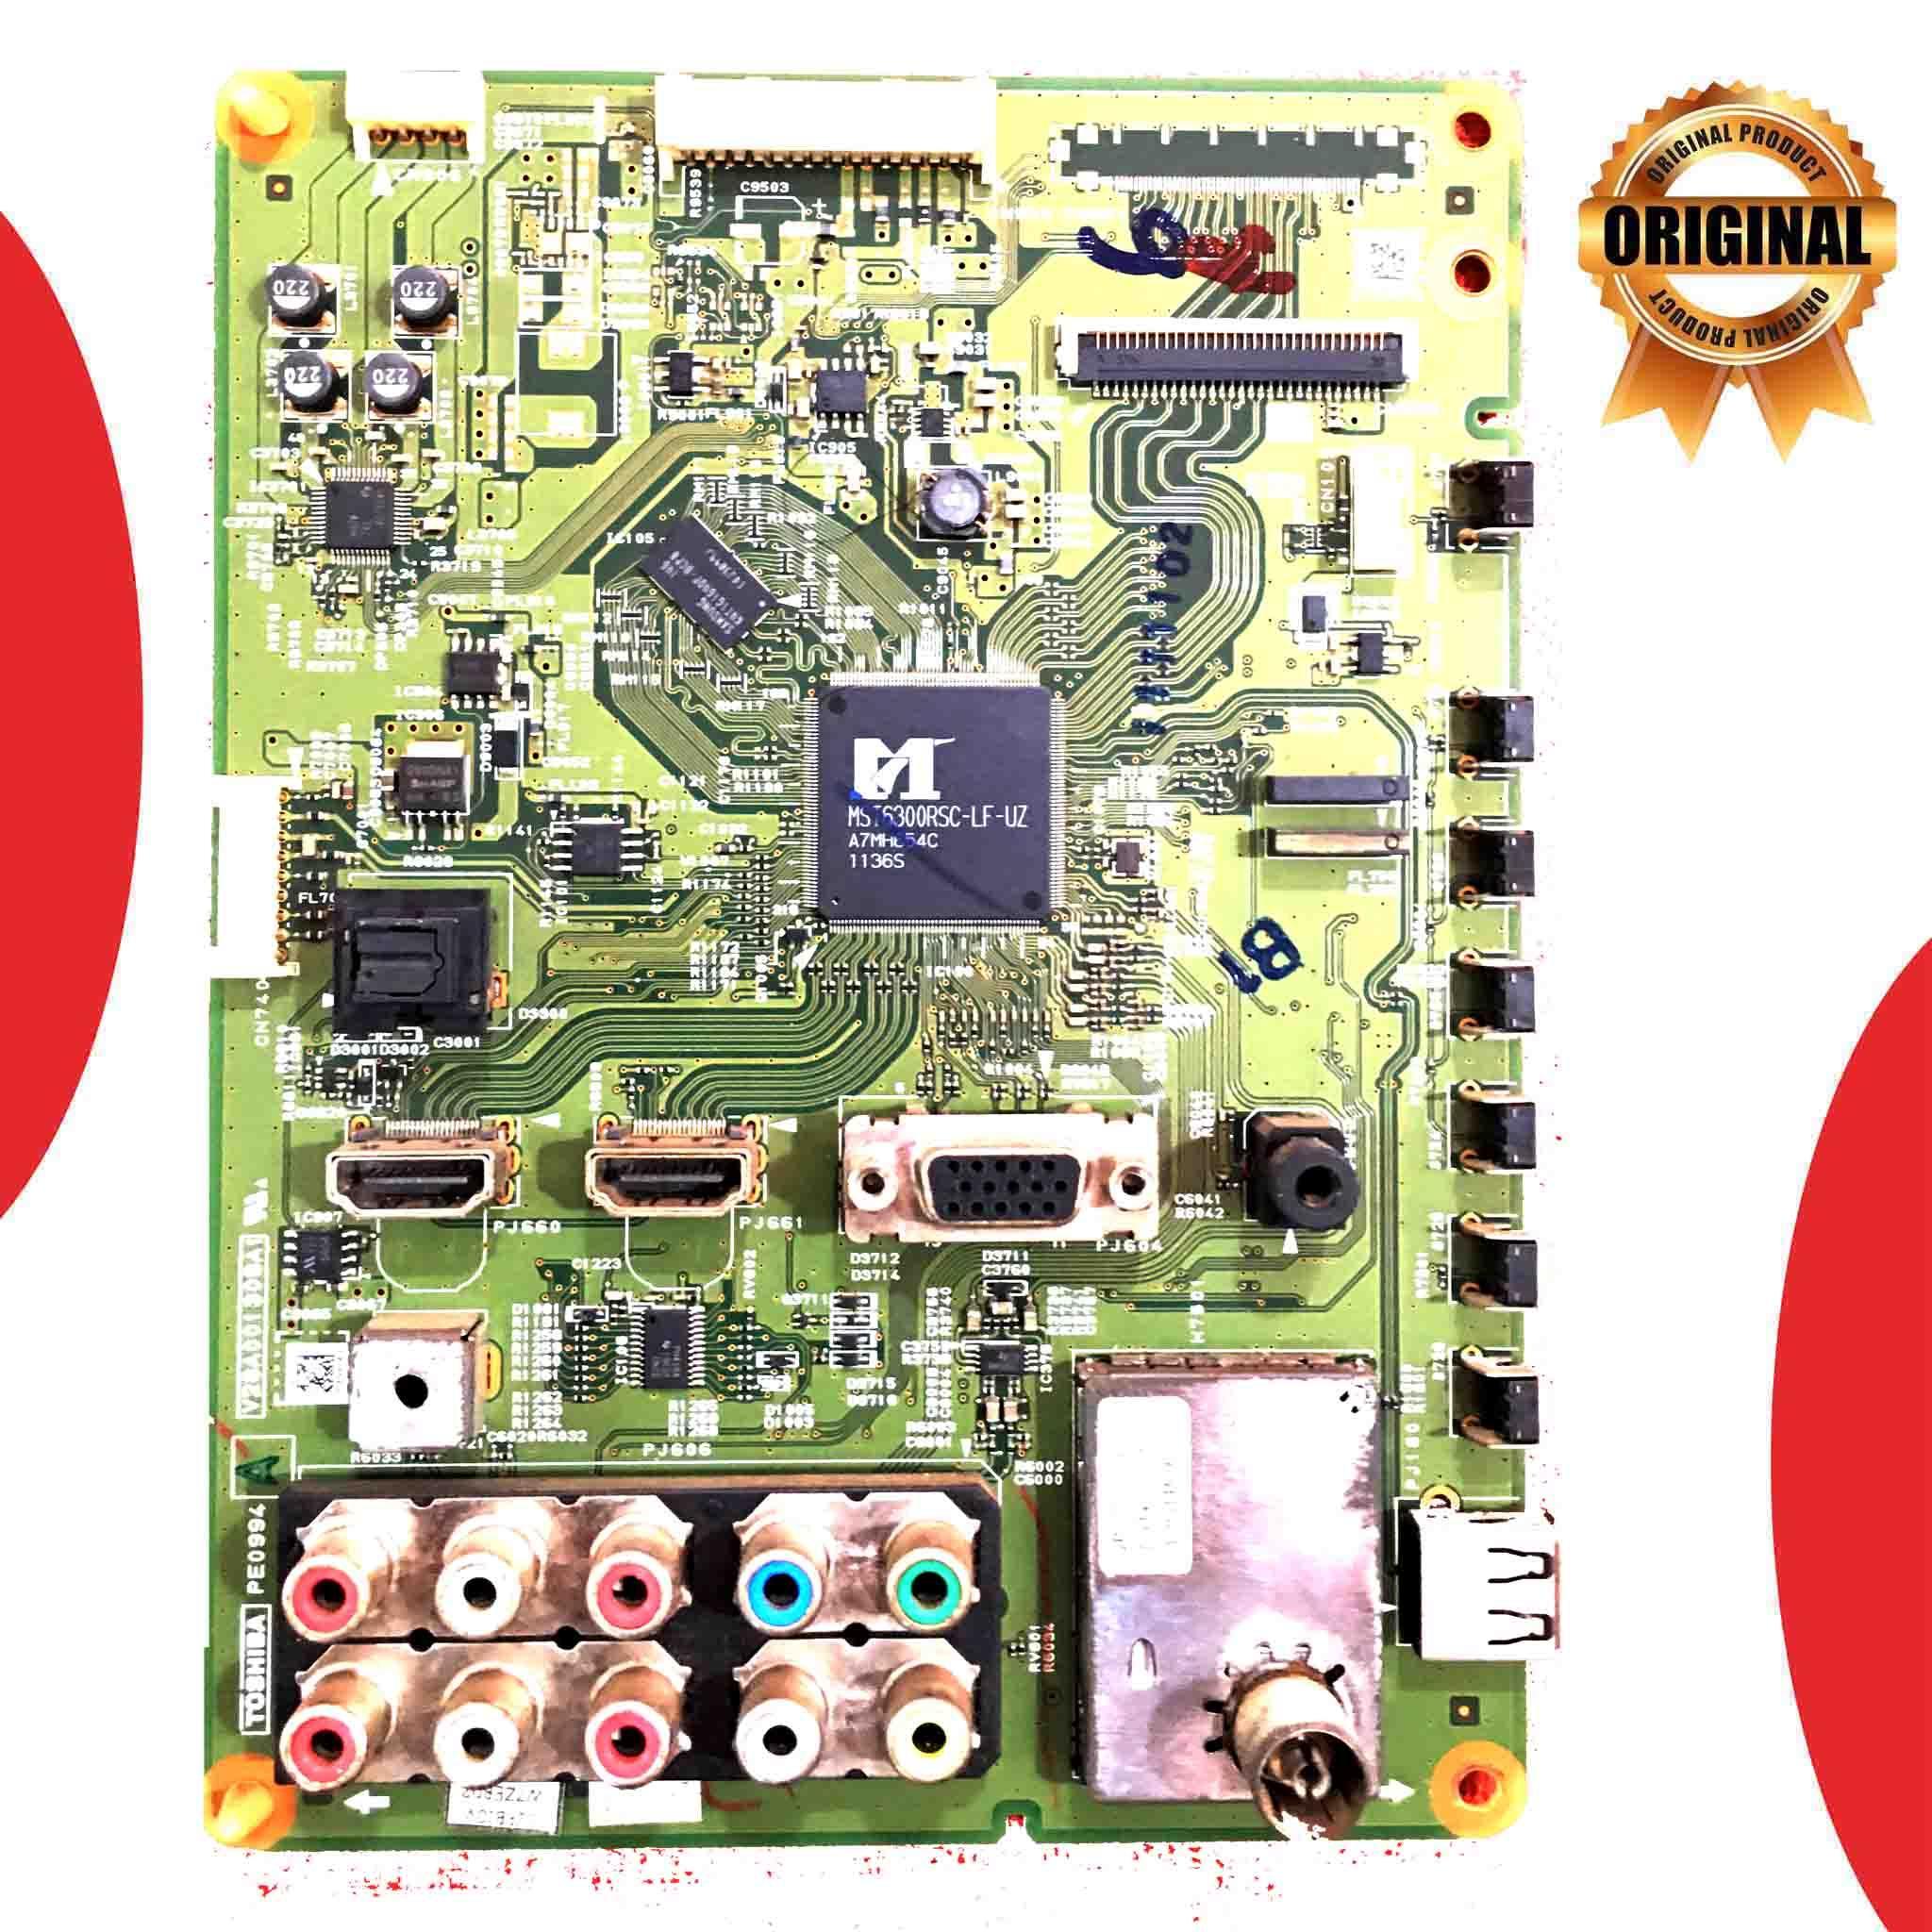 Toshiba 32 inch LCD TV Motherboard for Model 32PB10E - Great Bharat Electronics